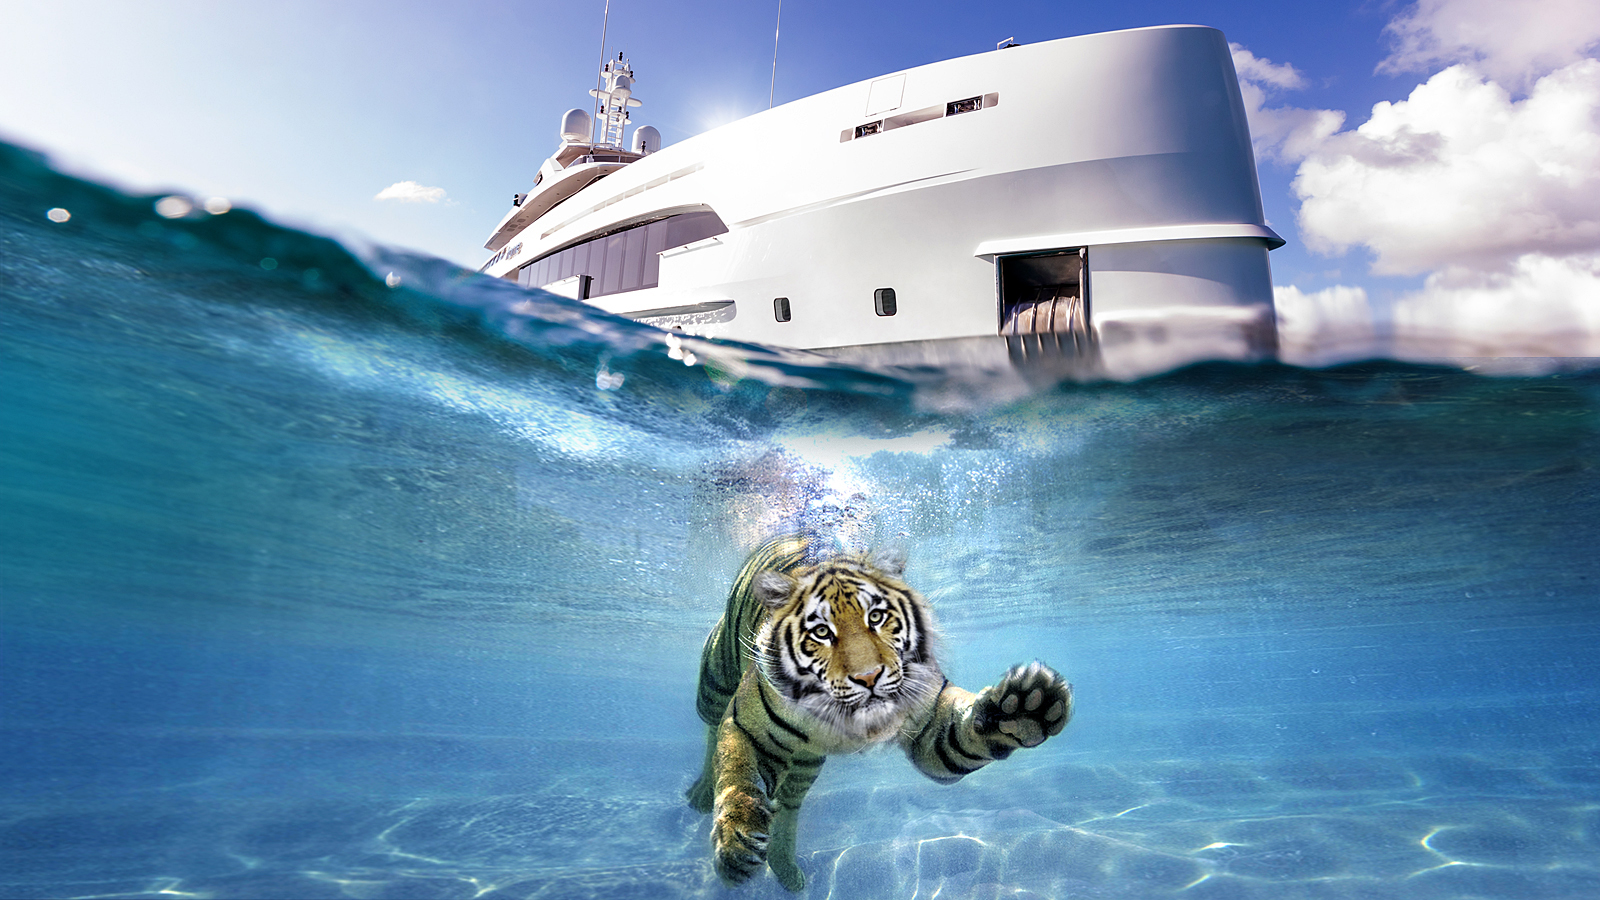 Heesen yacht pictured above water with a tiger under the surface